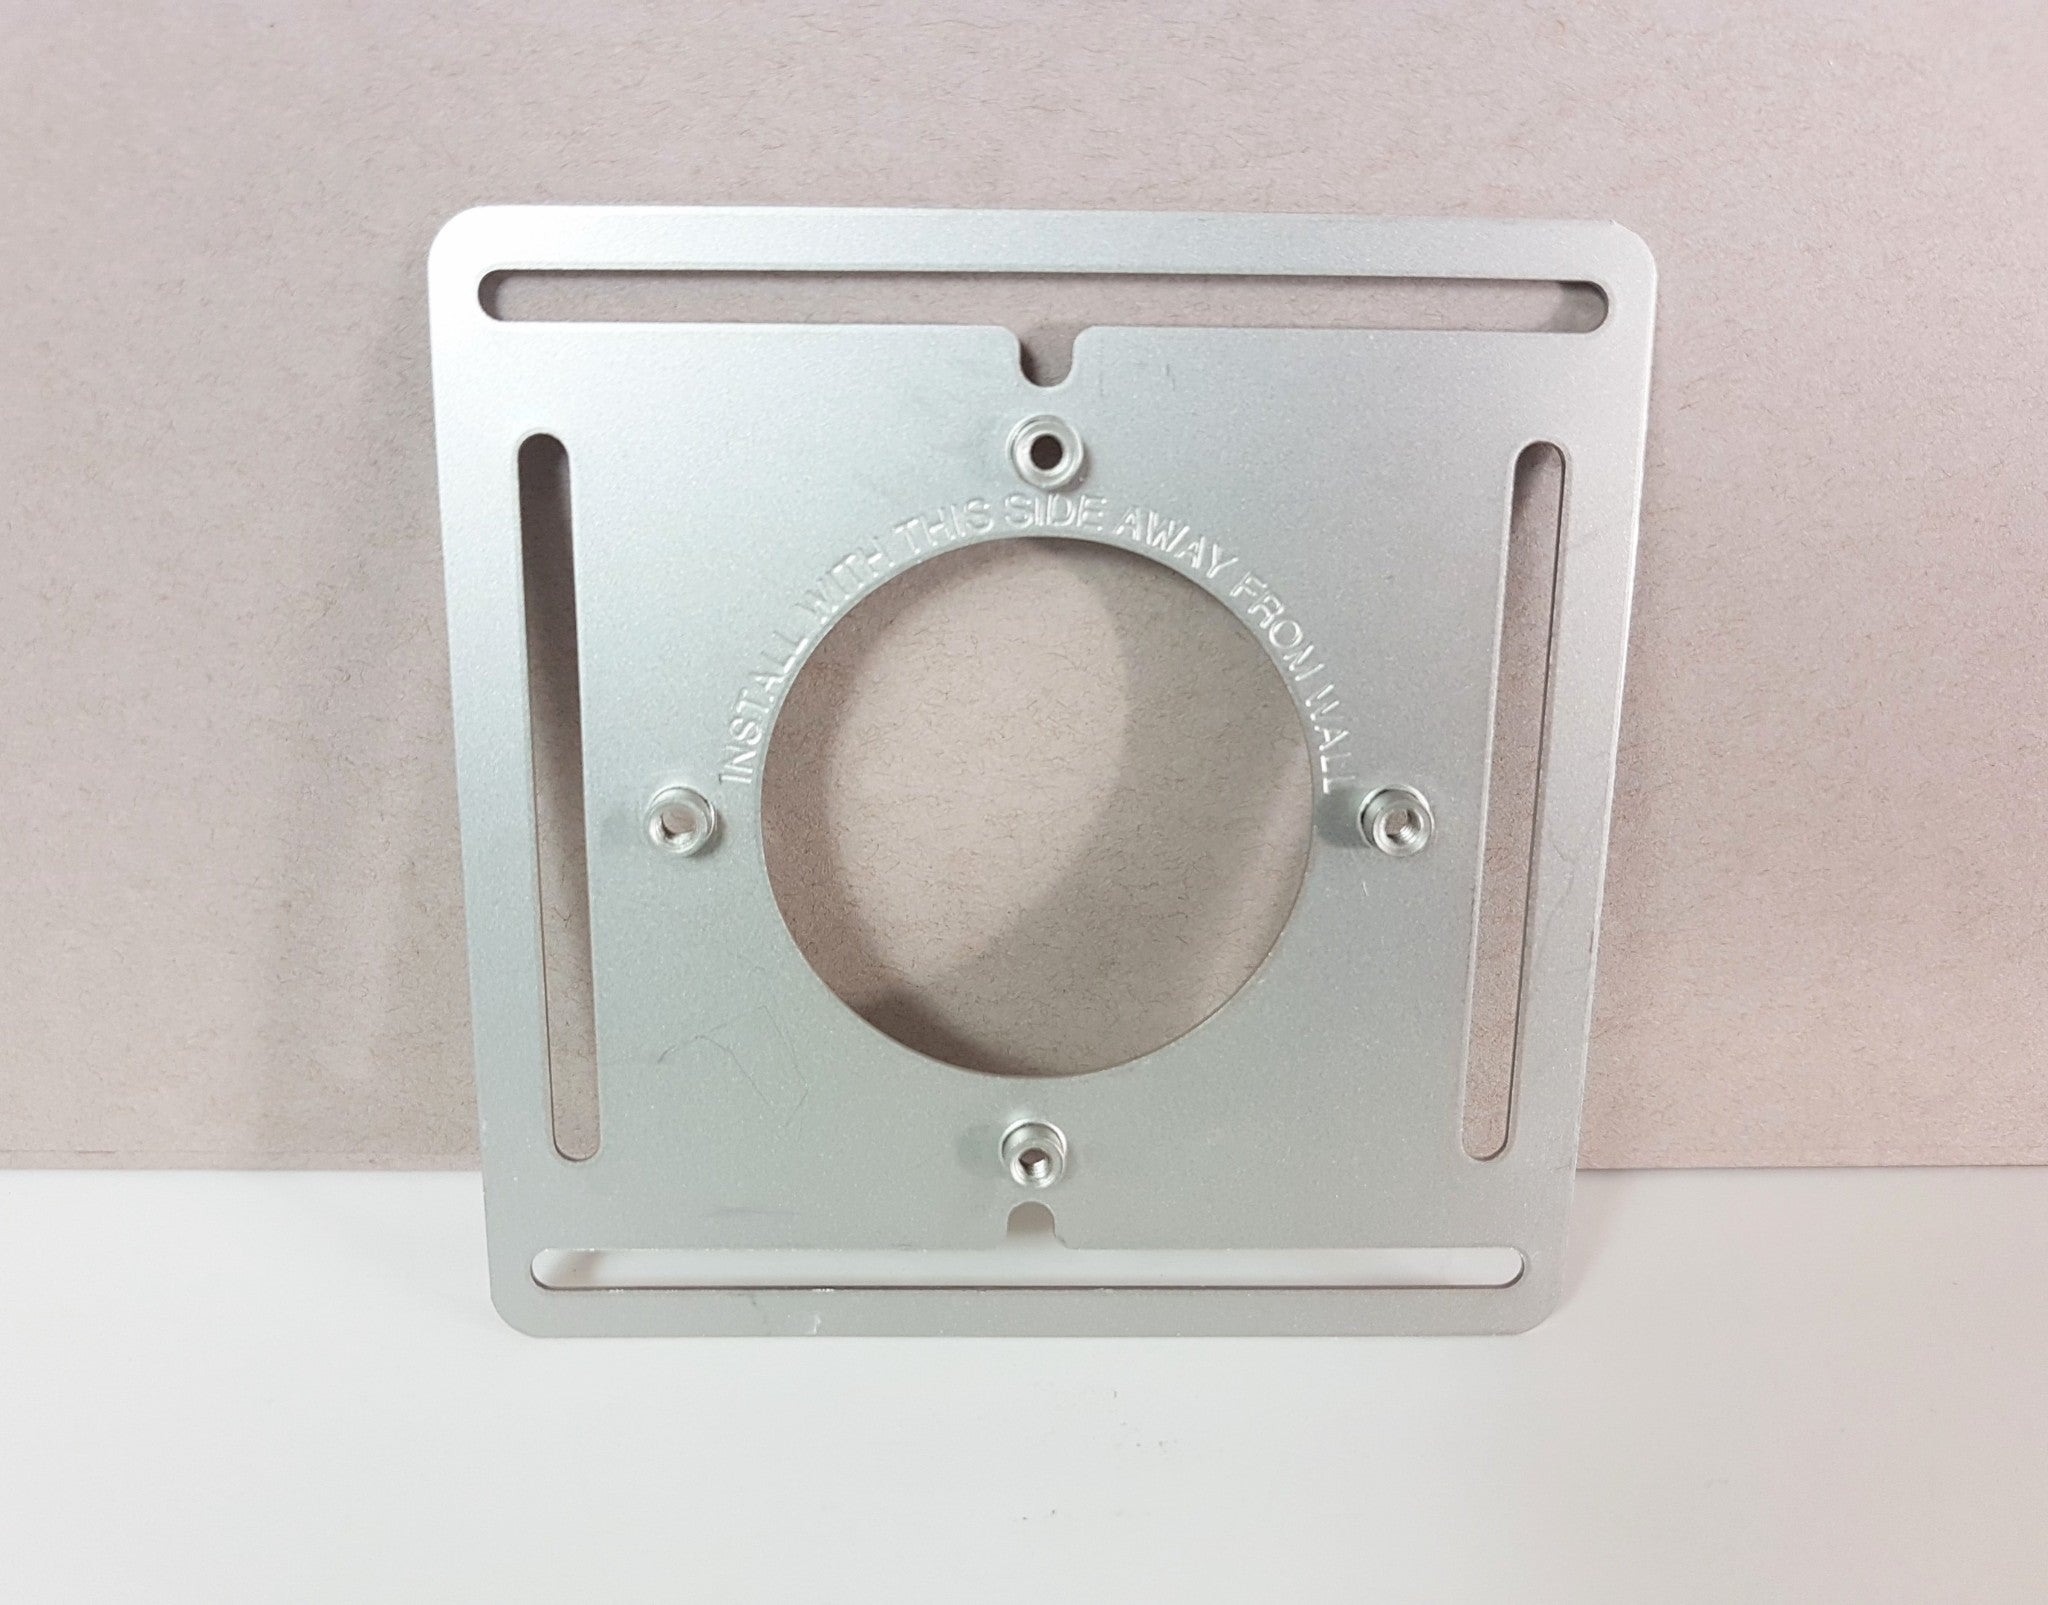 Google Nest Mounting Plate 3rd Gen & Thermostat E Steel Aluminum Wall Plate